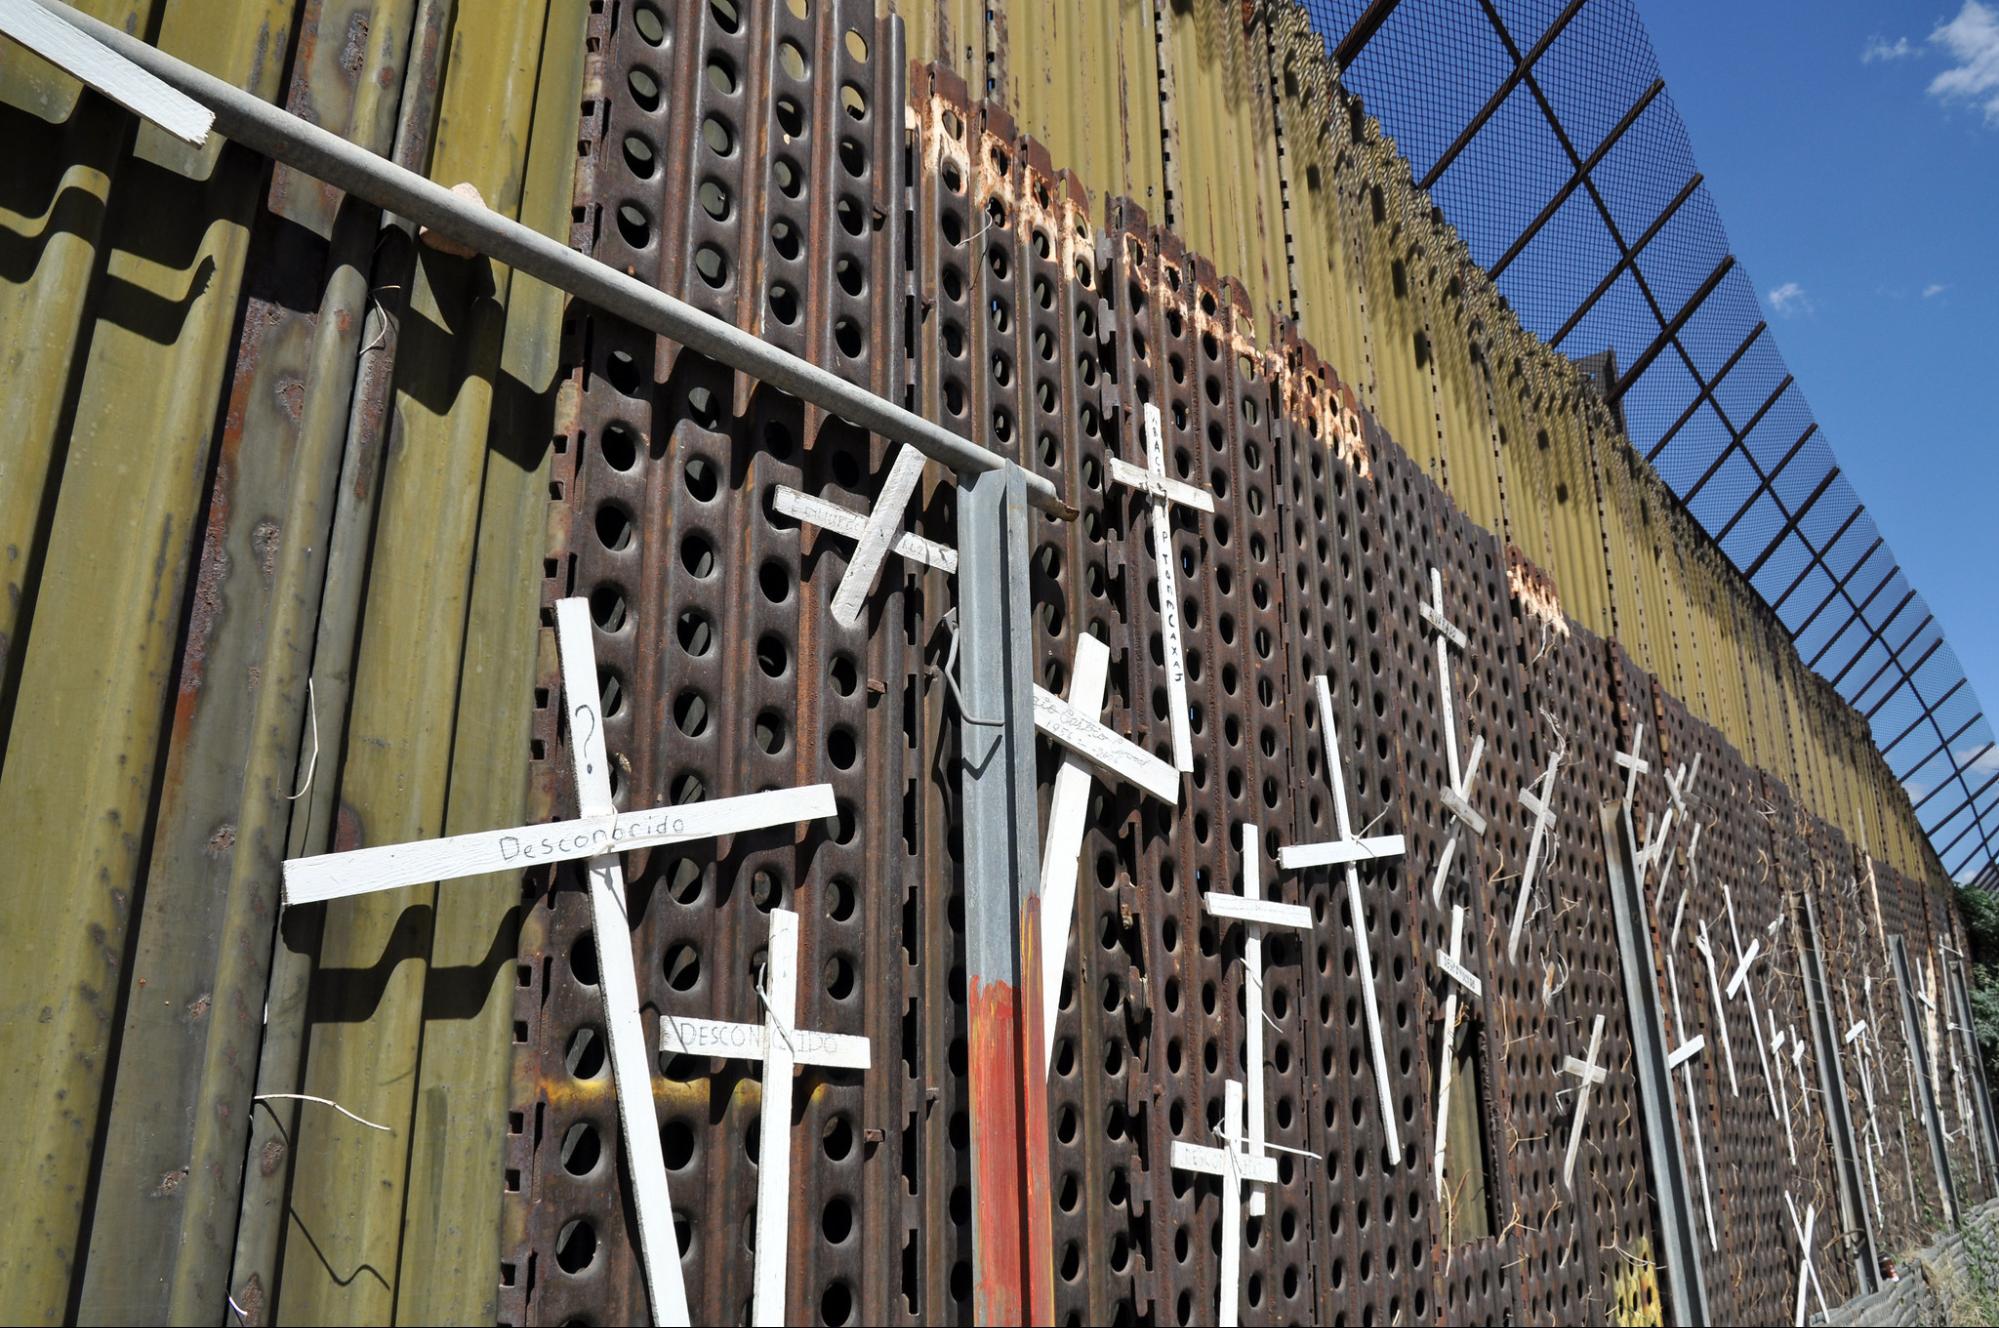 A wall made of metal sheeting and topped with wire extends into the distance. Simple wooden crosses cover the wall. Although the writing is almost invisible, the names of people who have died crossing the border are written on them.